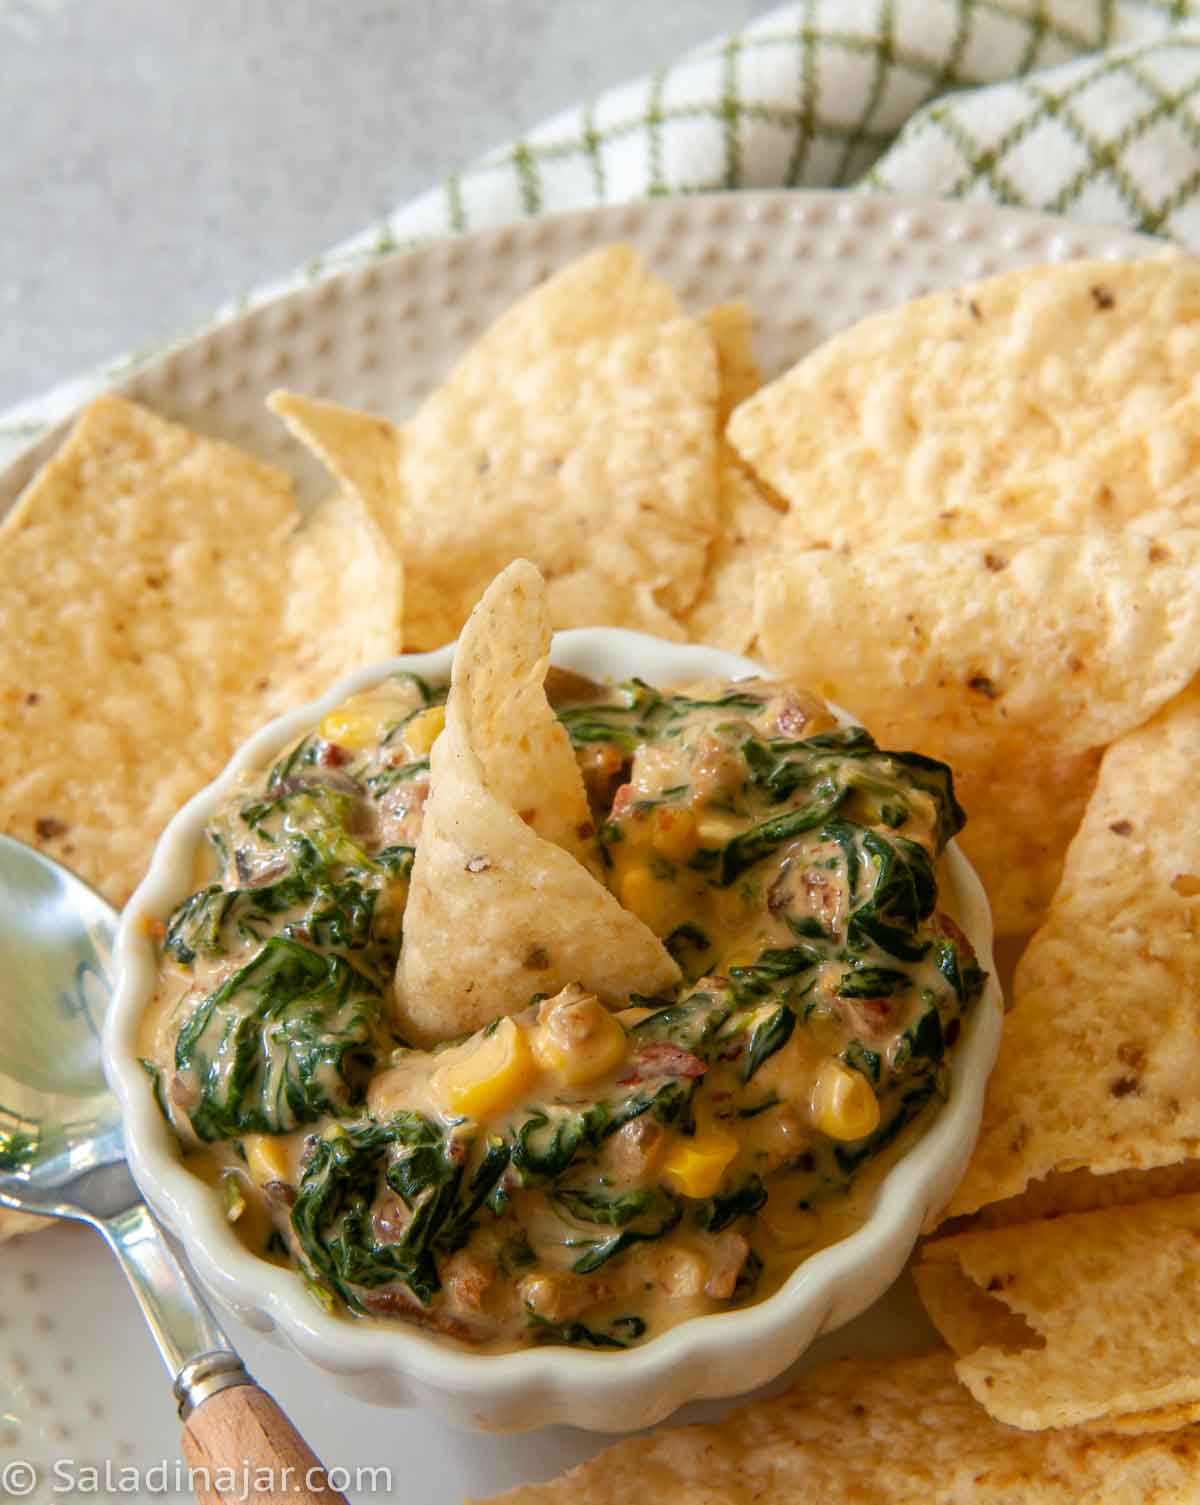 Serving Espinaca as a dip. Shown with tortilla chips surrounding dip on a plate with a spoon.